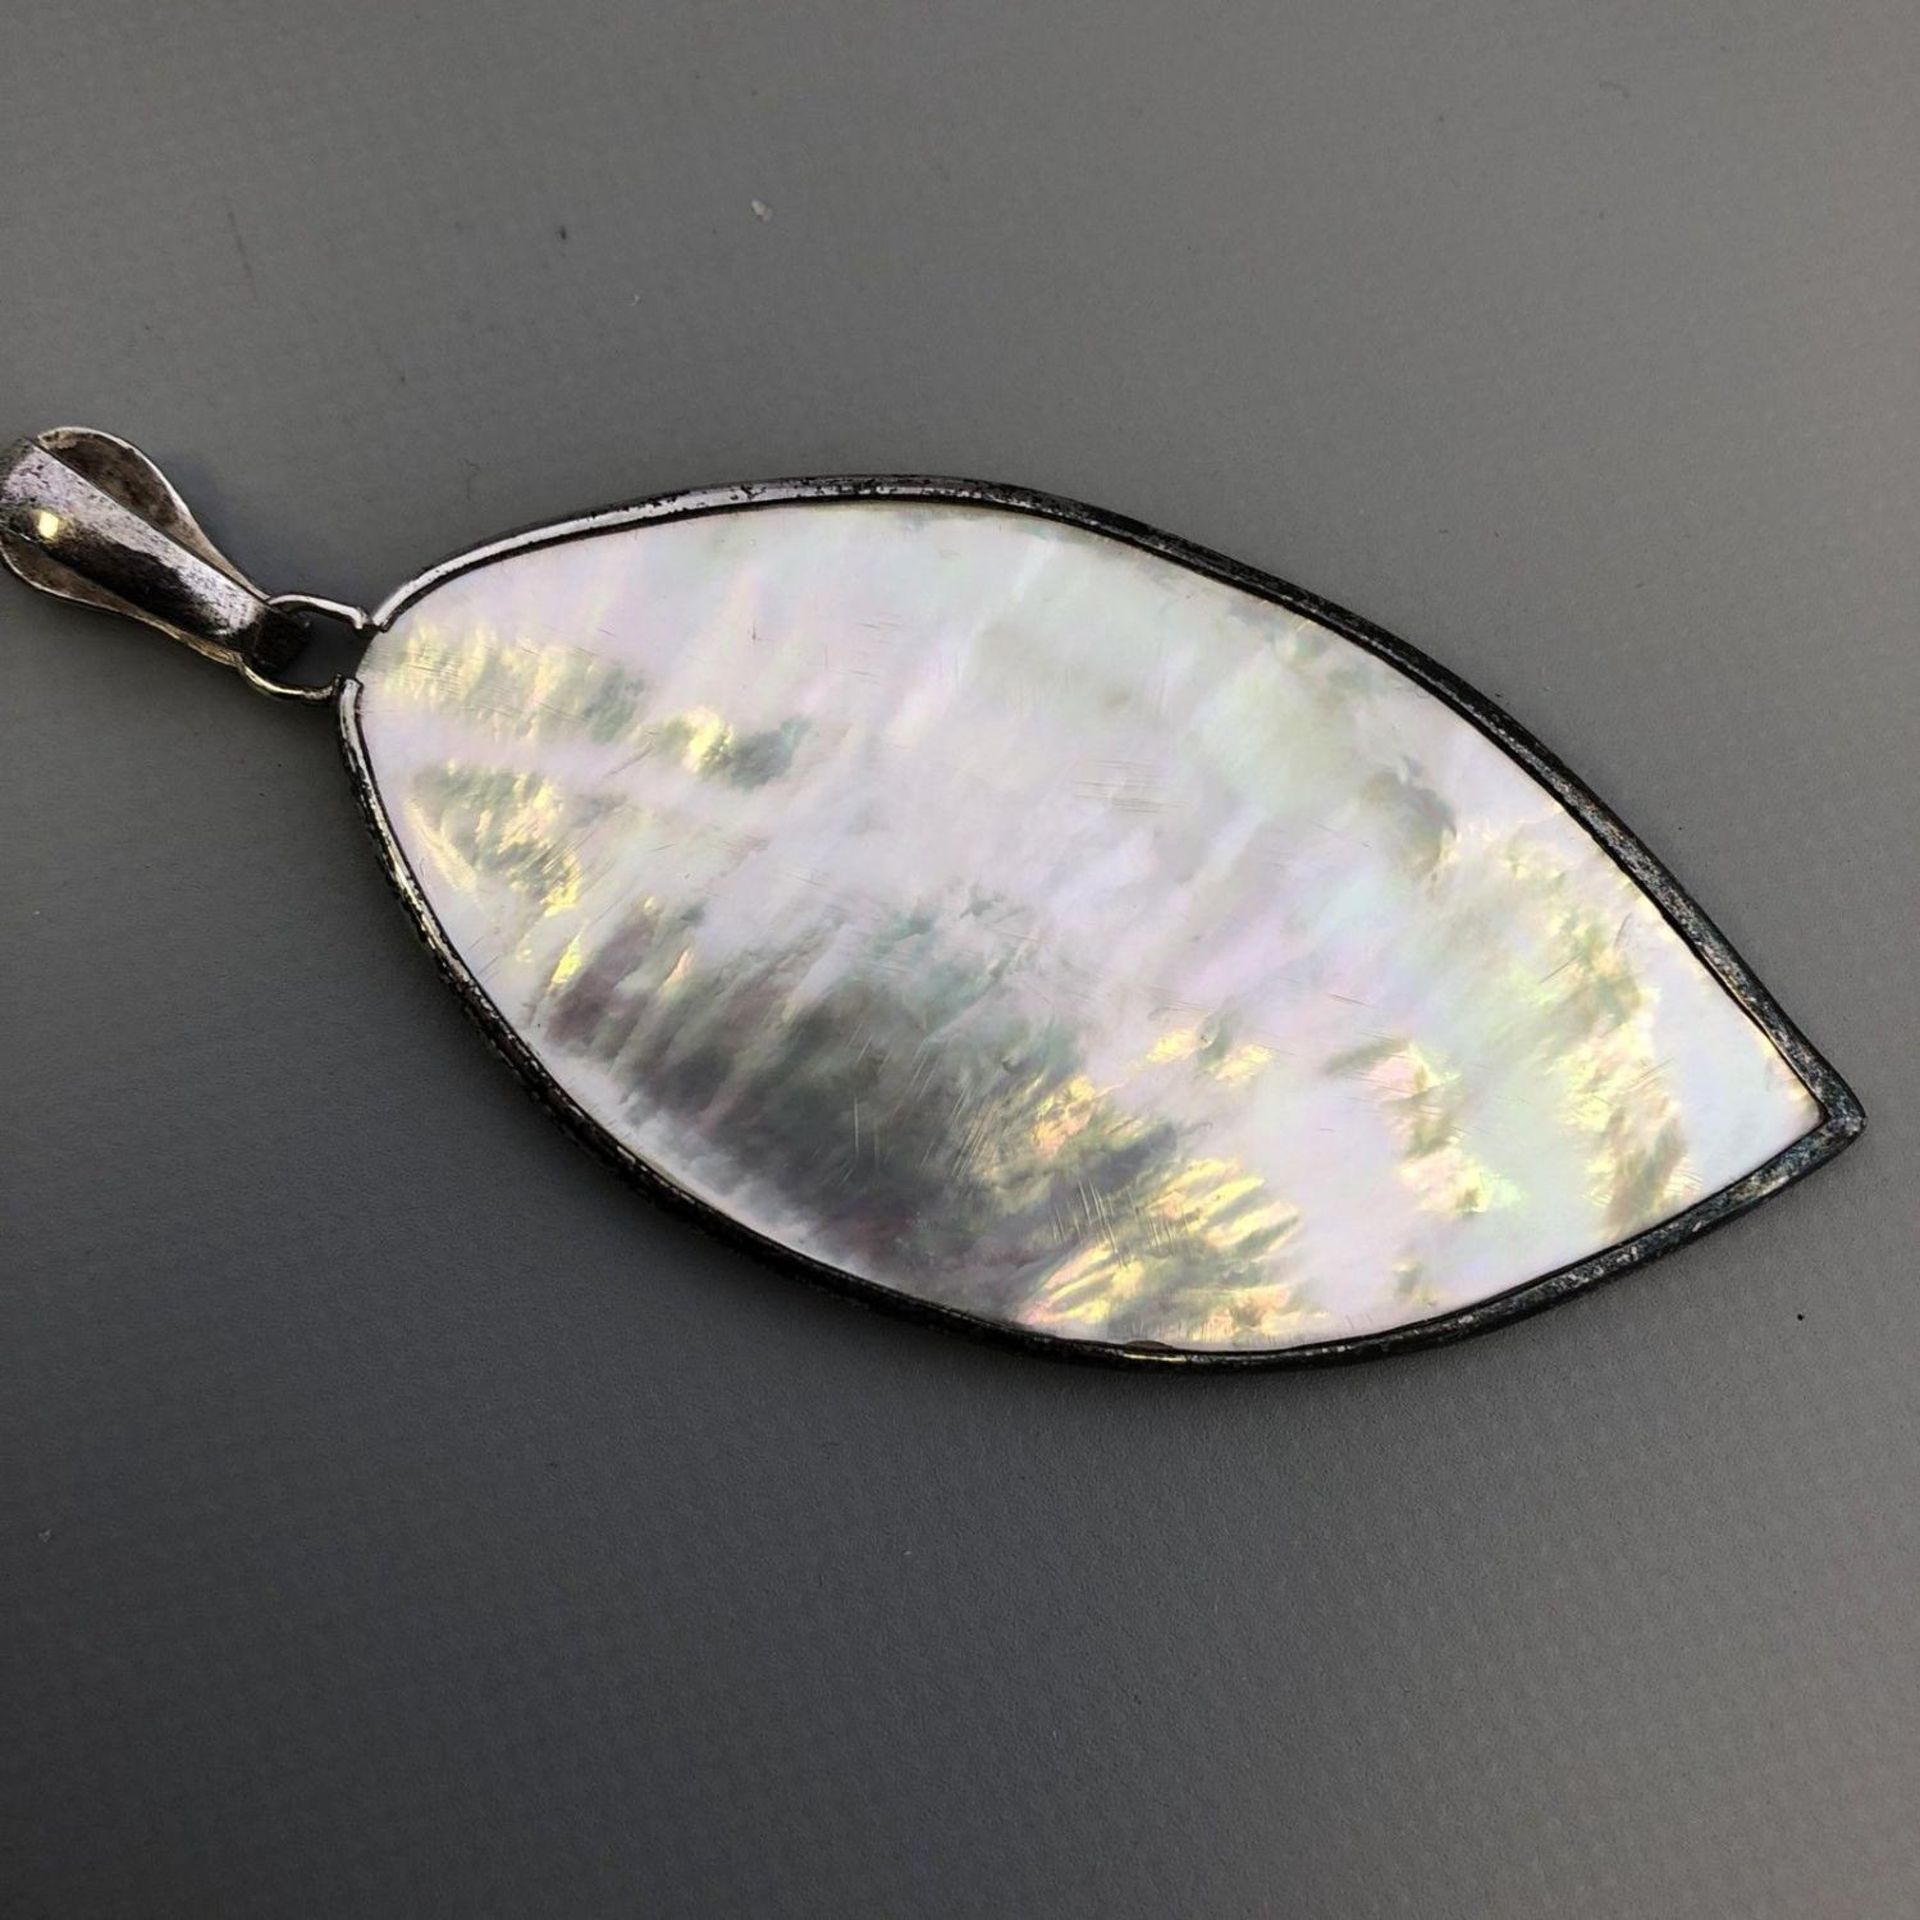 Boxed Stunning Large Mother of Pearl Leaf Statement Pendant with 925 Silver Mount - Image 3 of 3